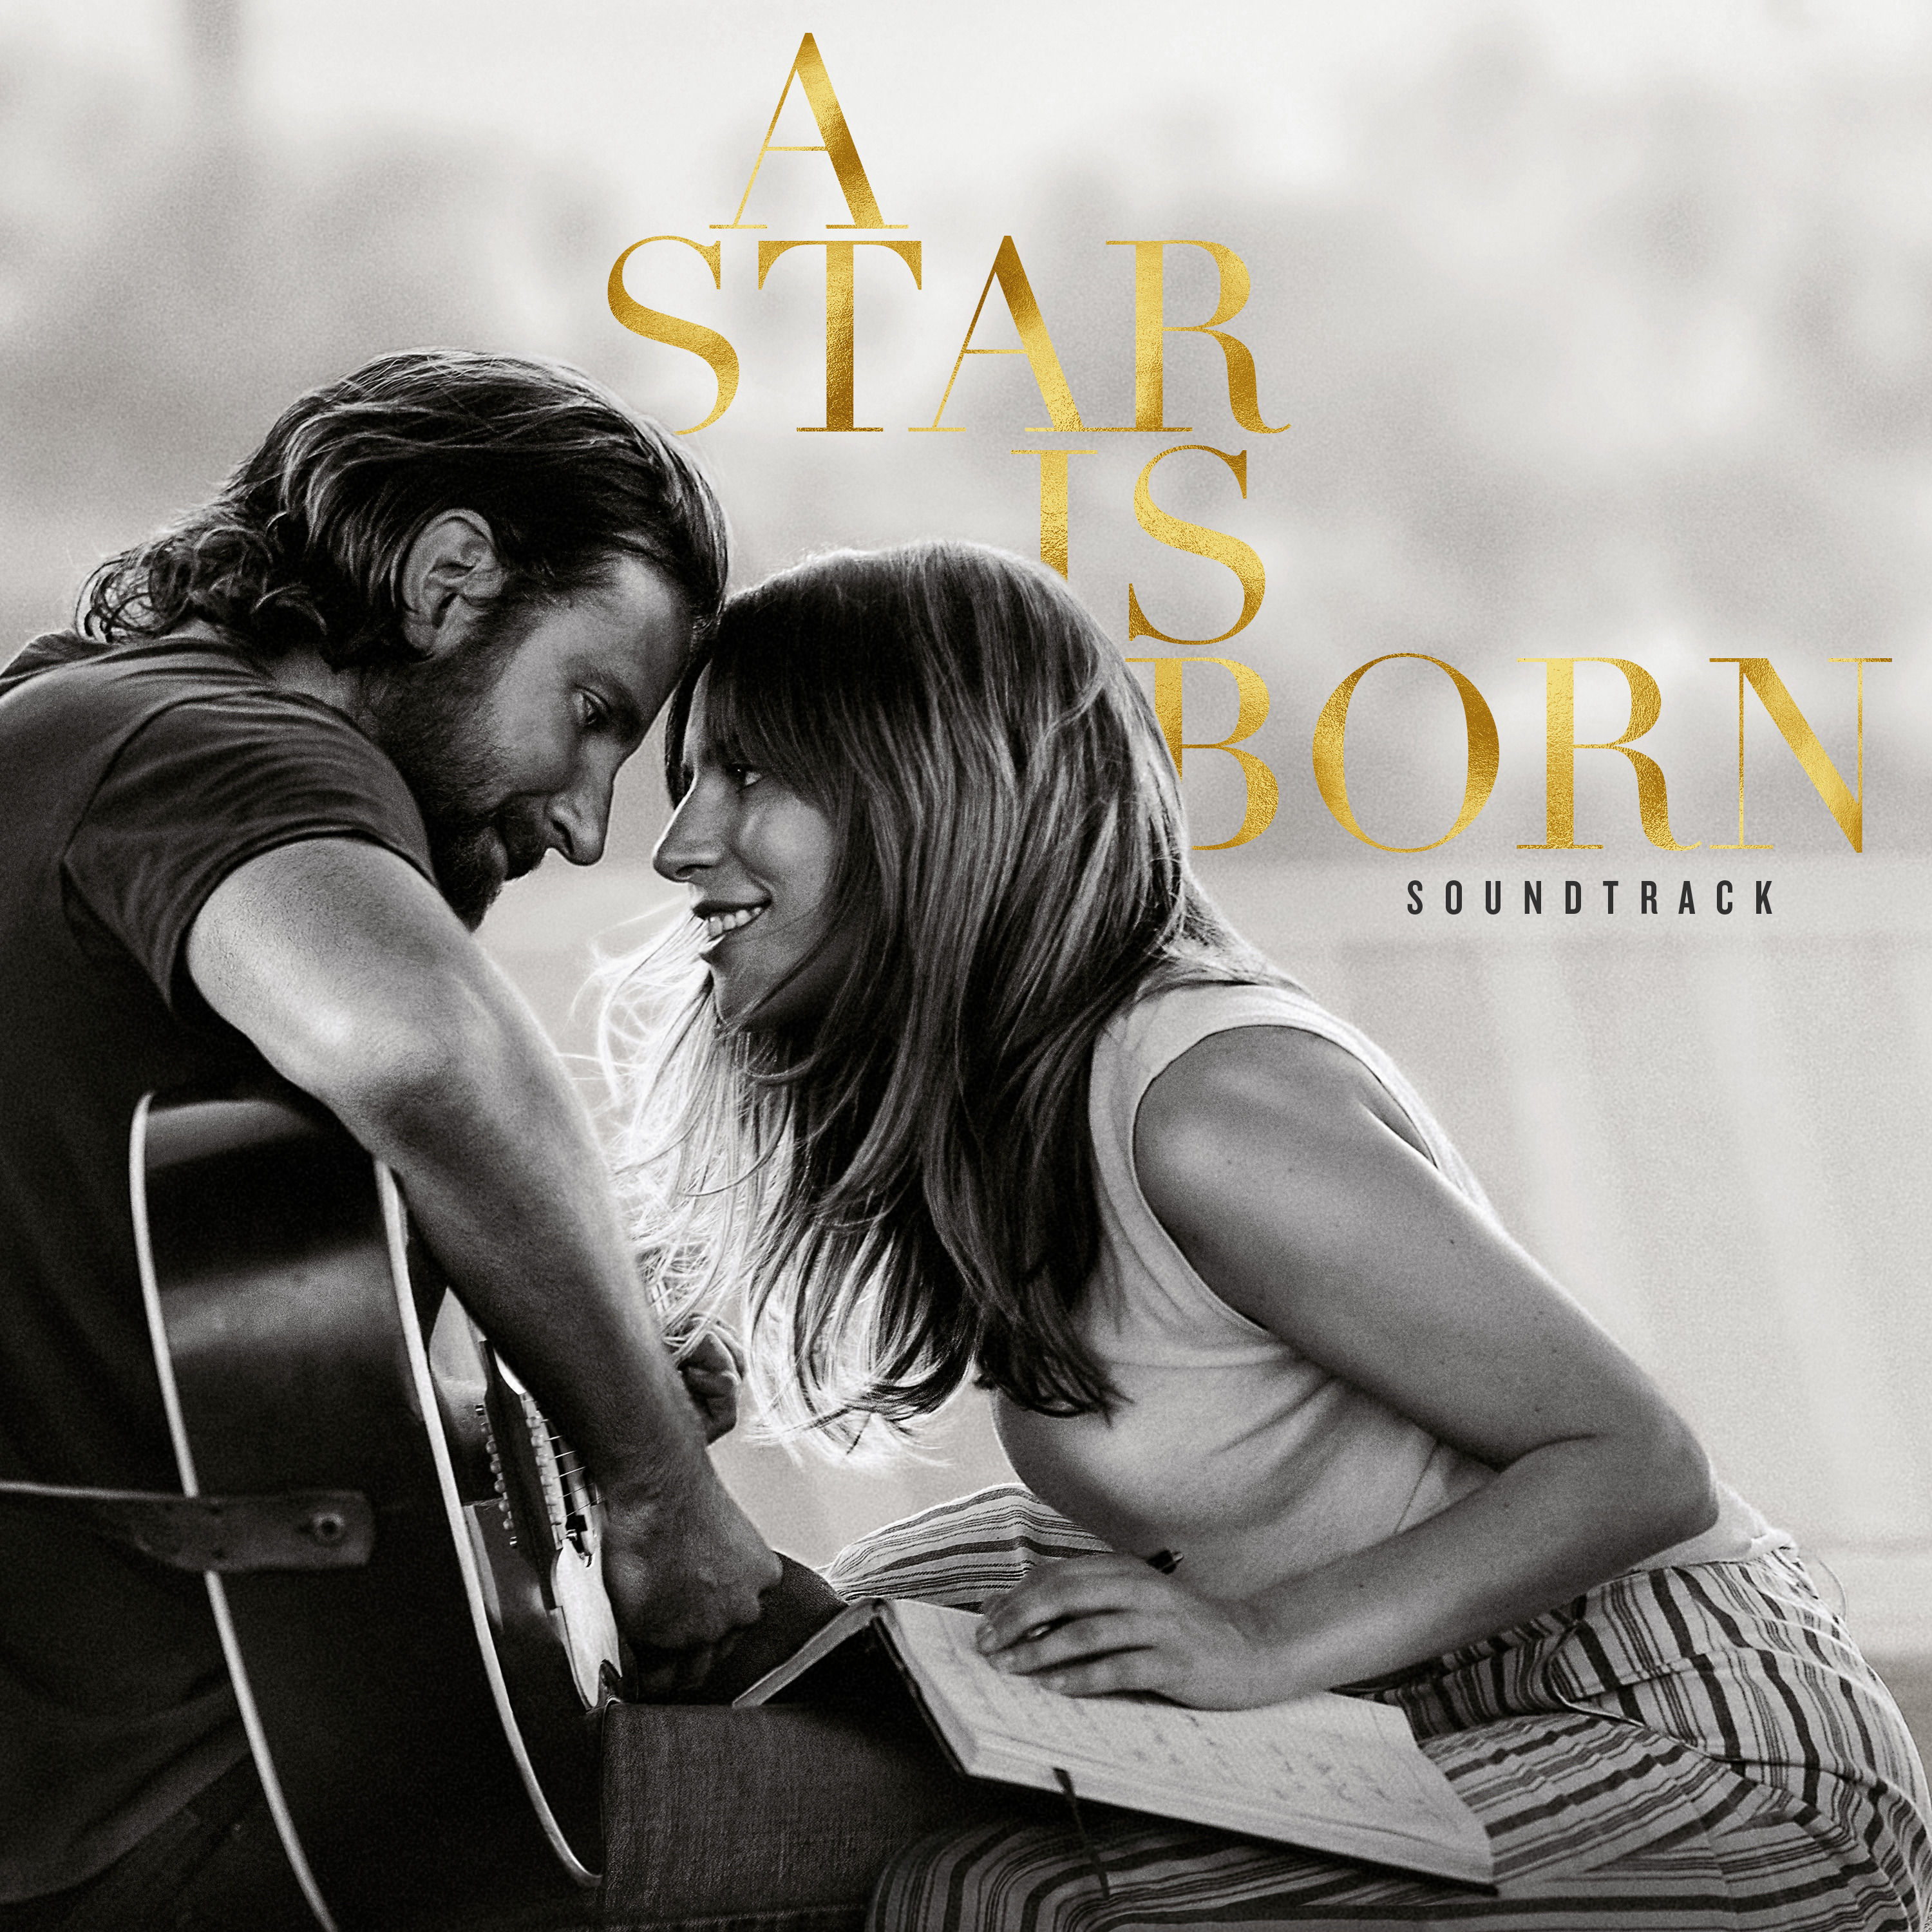 a star is born soundtrack wii